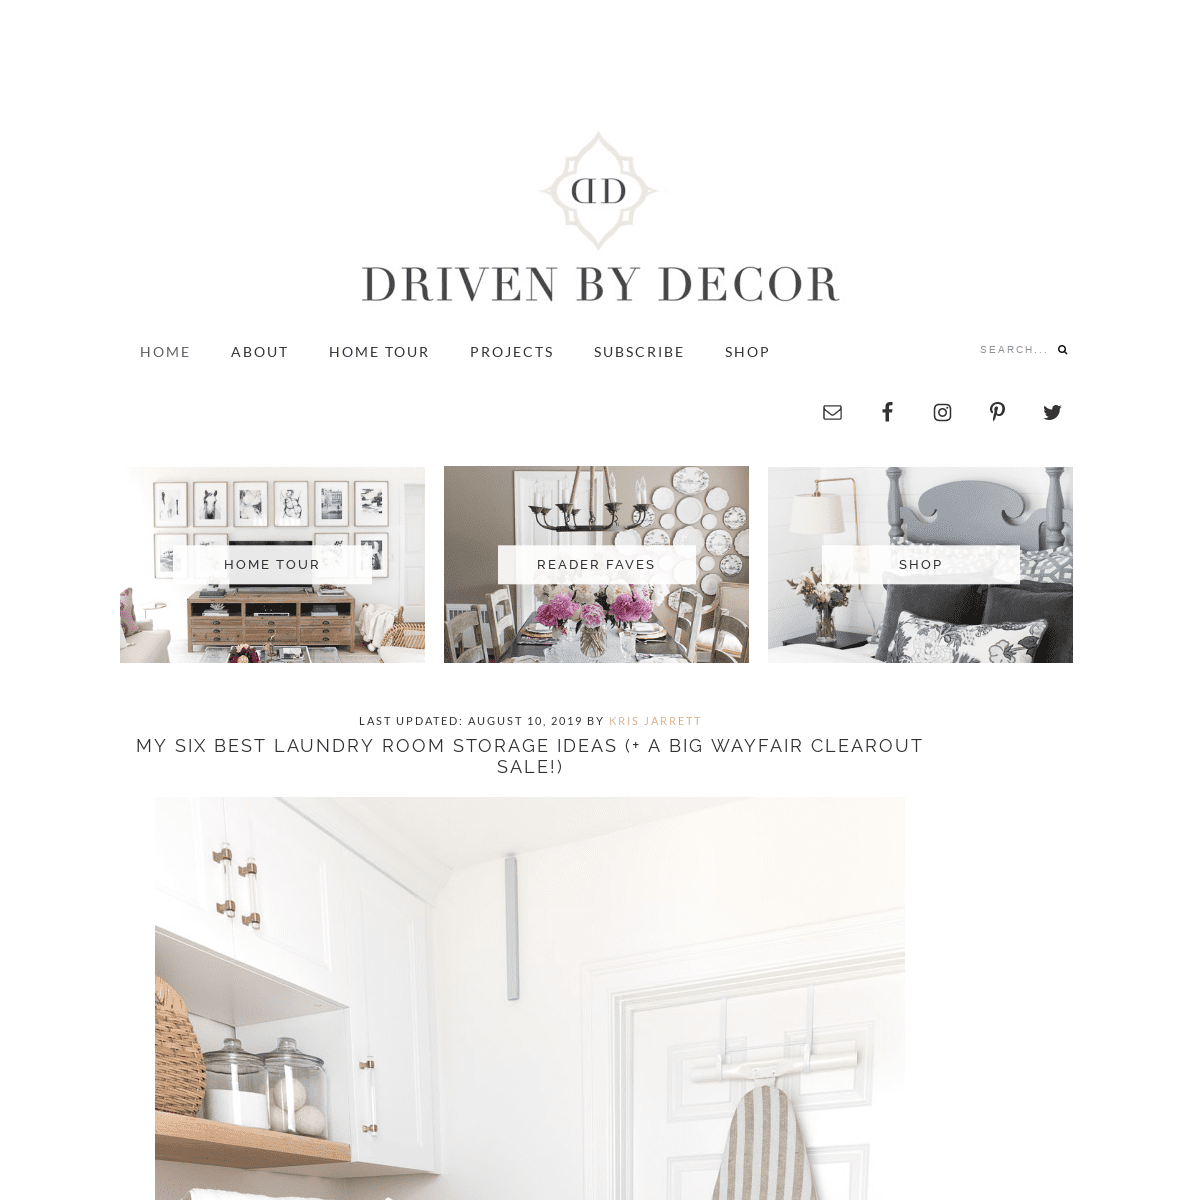 Driven by Decor | Decorating Homes with Affordable Style and Timeless Design